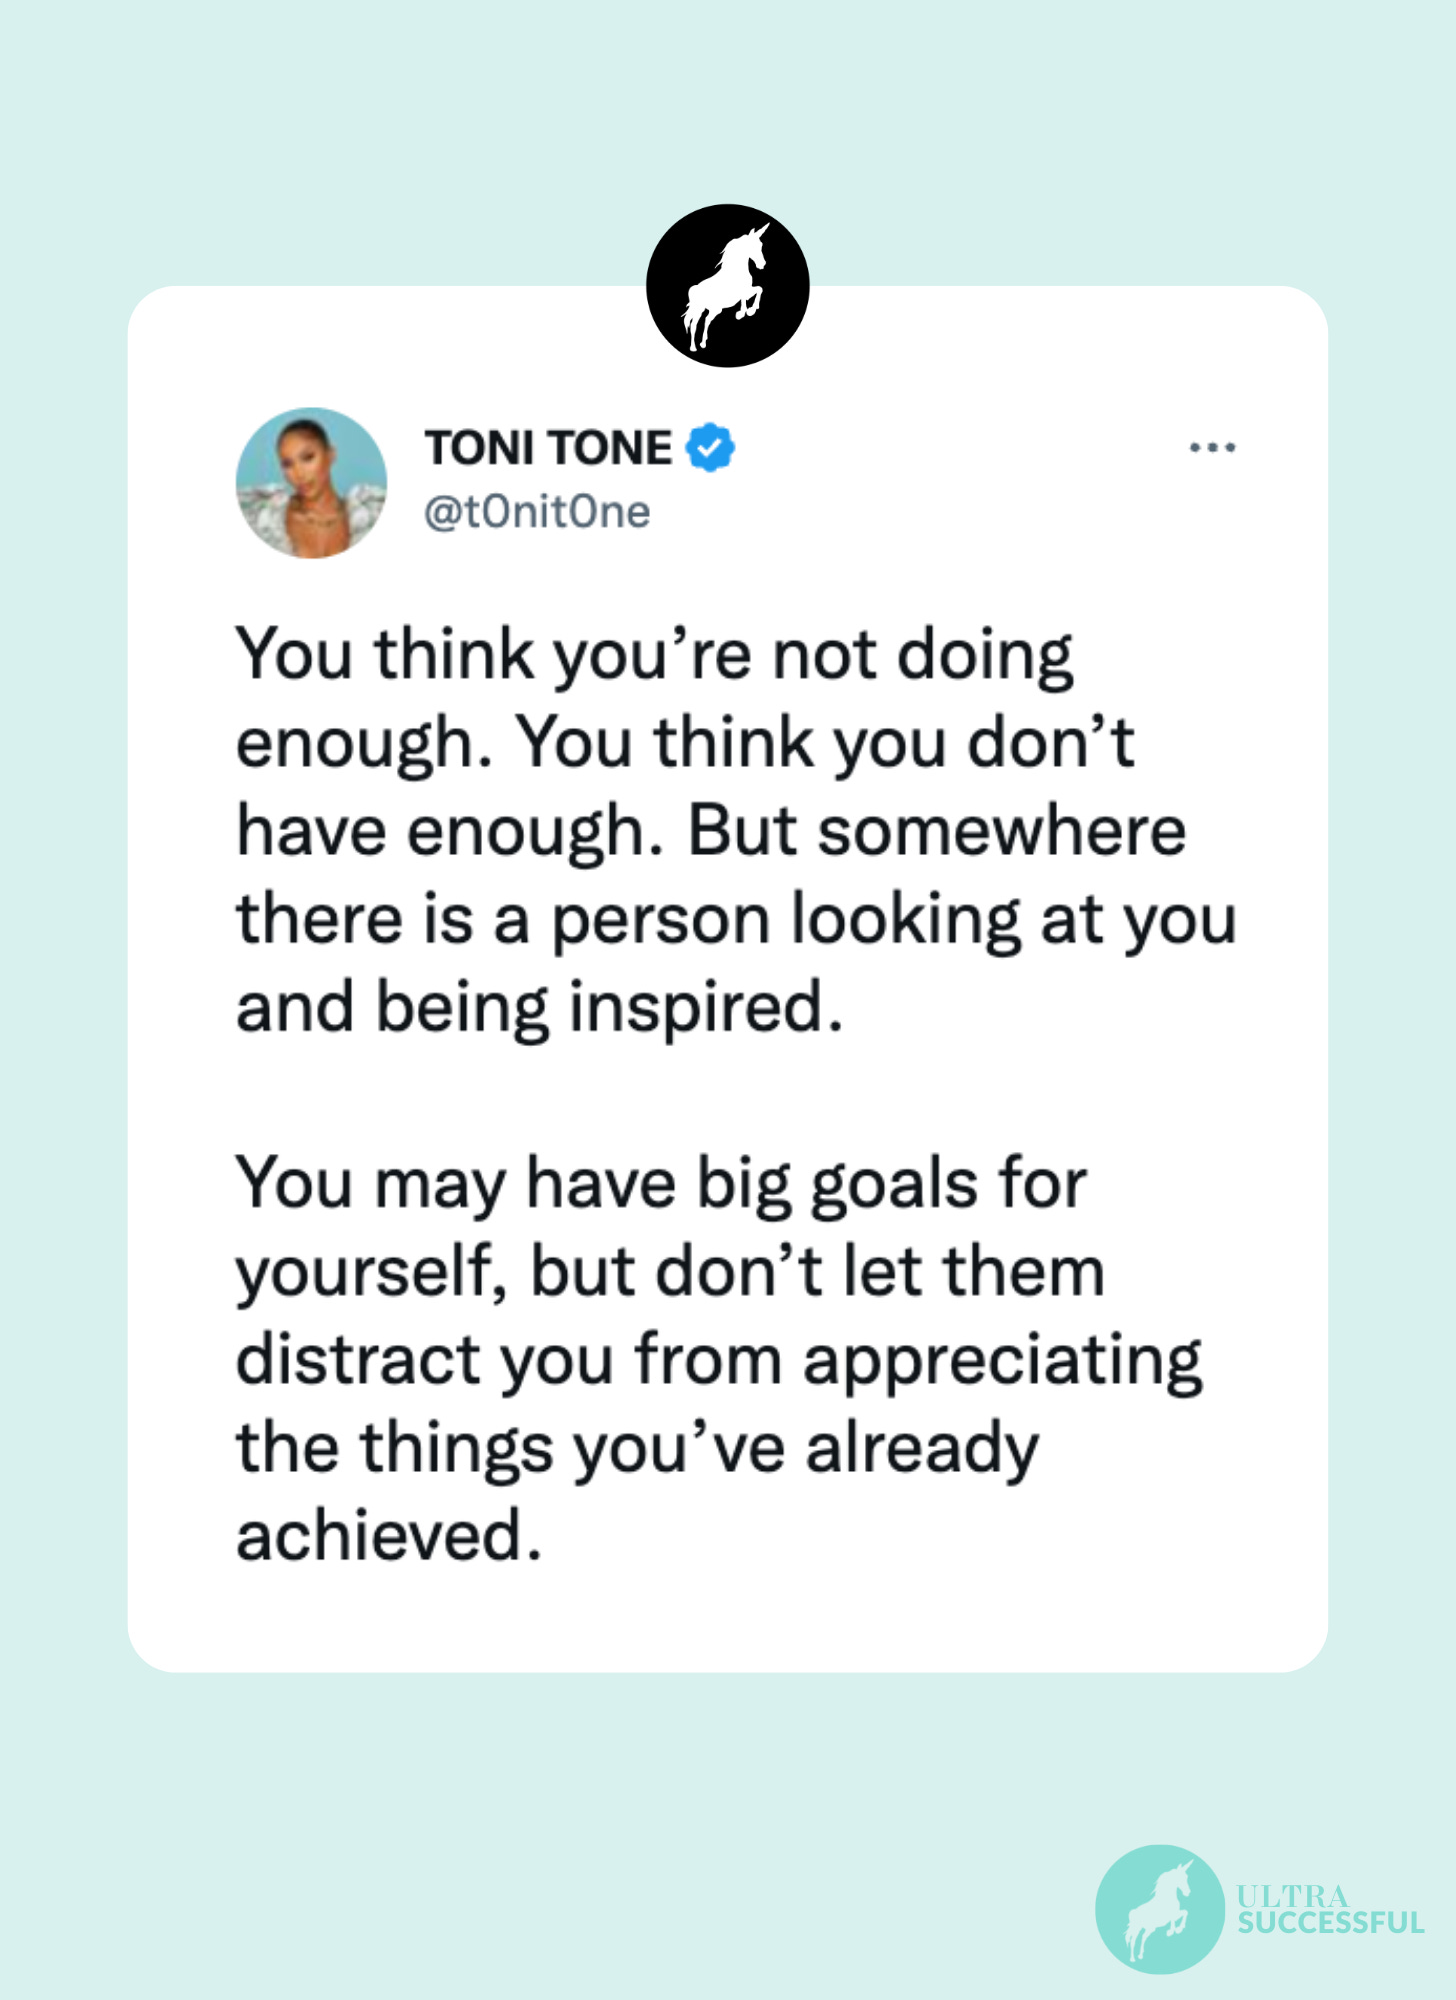 @t0nit0ne: You think you’re not doing enough. You think you don’t have enough. But somewhere there is a person looking at you and being inspired.   You may have big goals for yourself, but don’t let them distract you from appreciating the things you’ve already achieved.